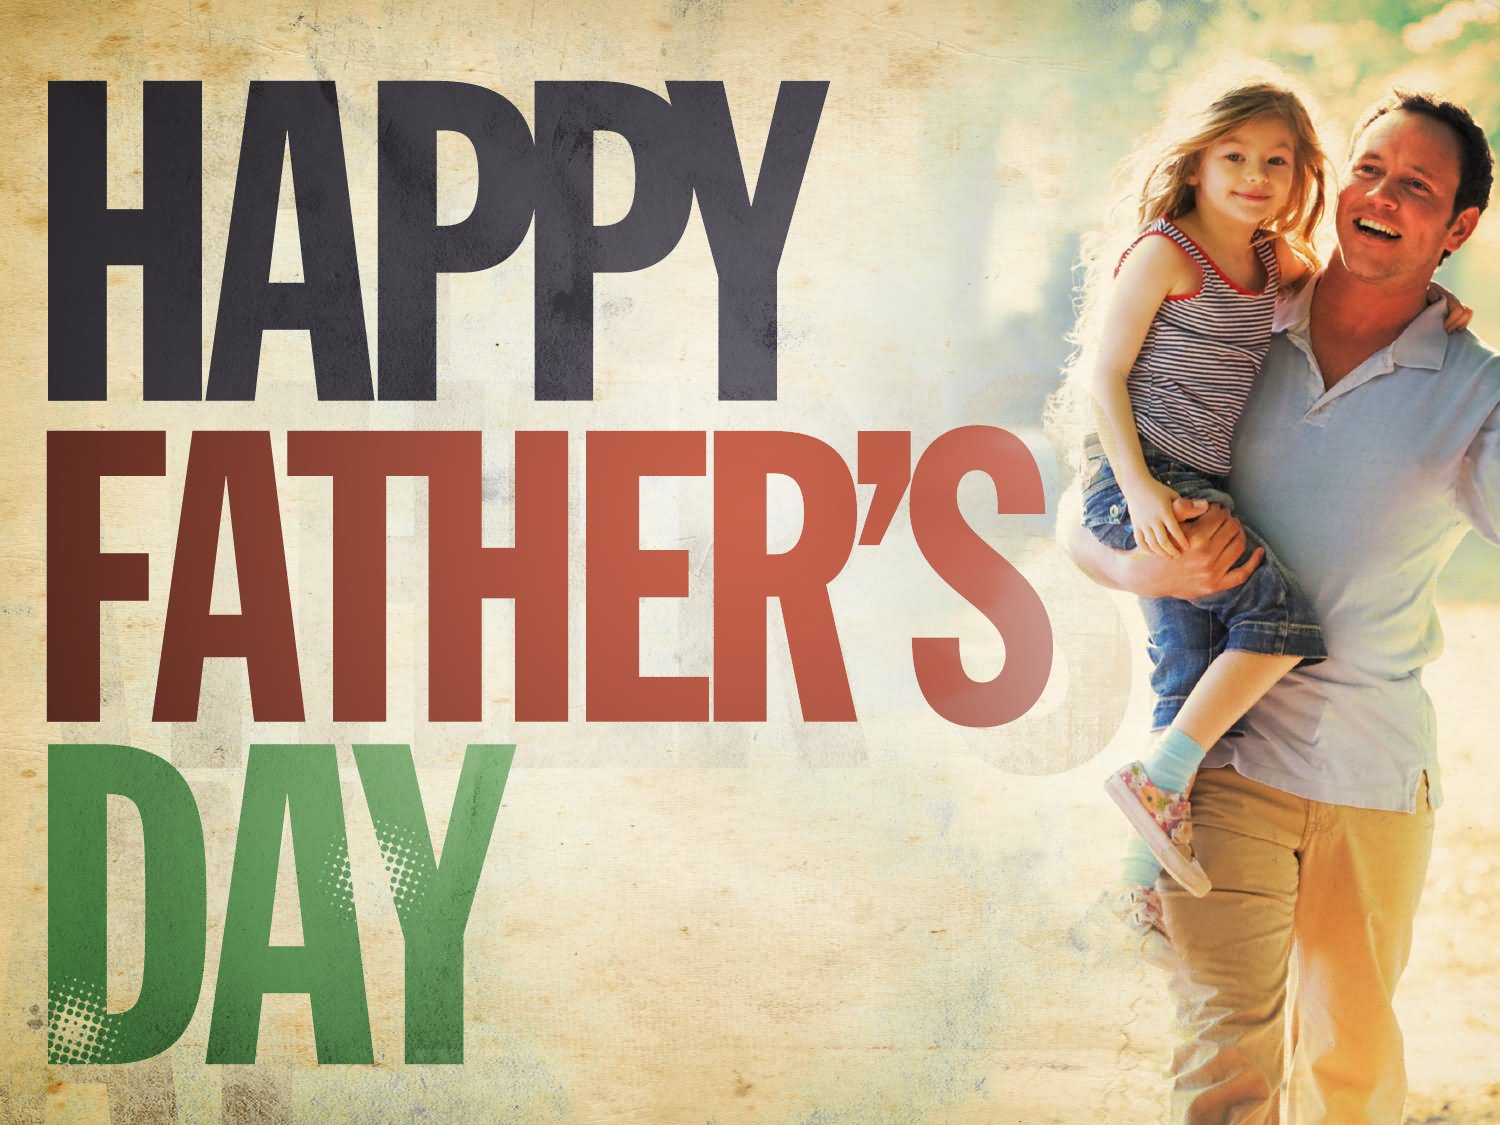 Happy Father's Day Greetings Picture For Facebook